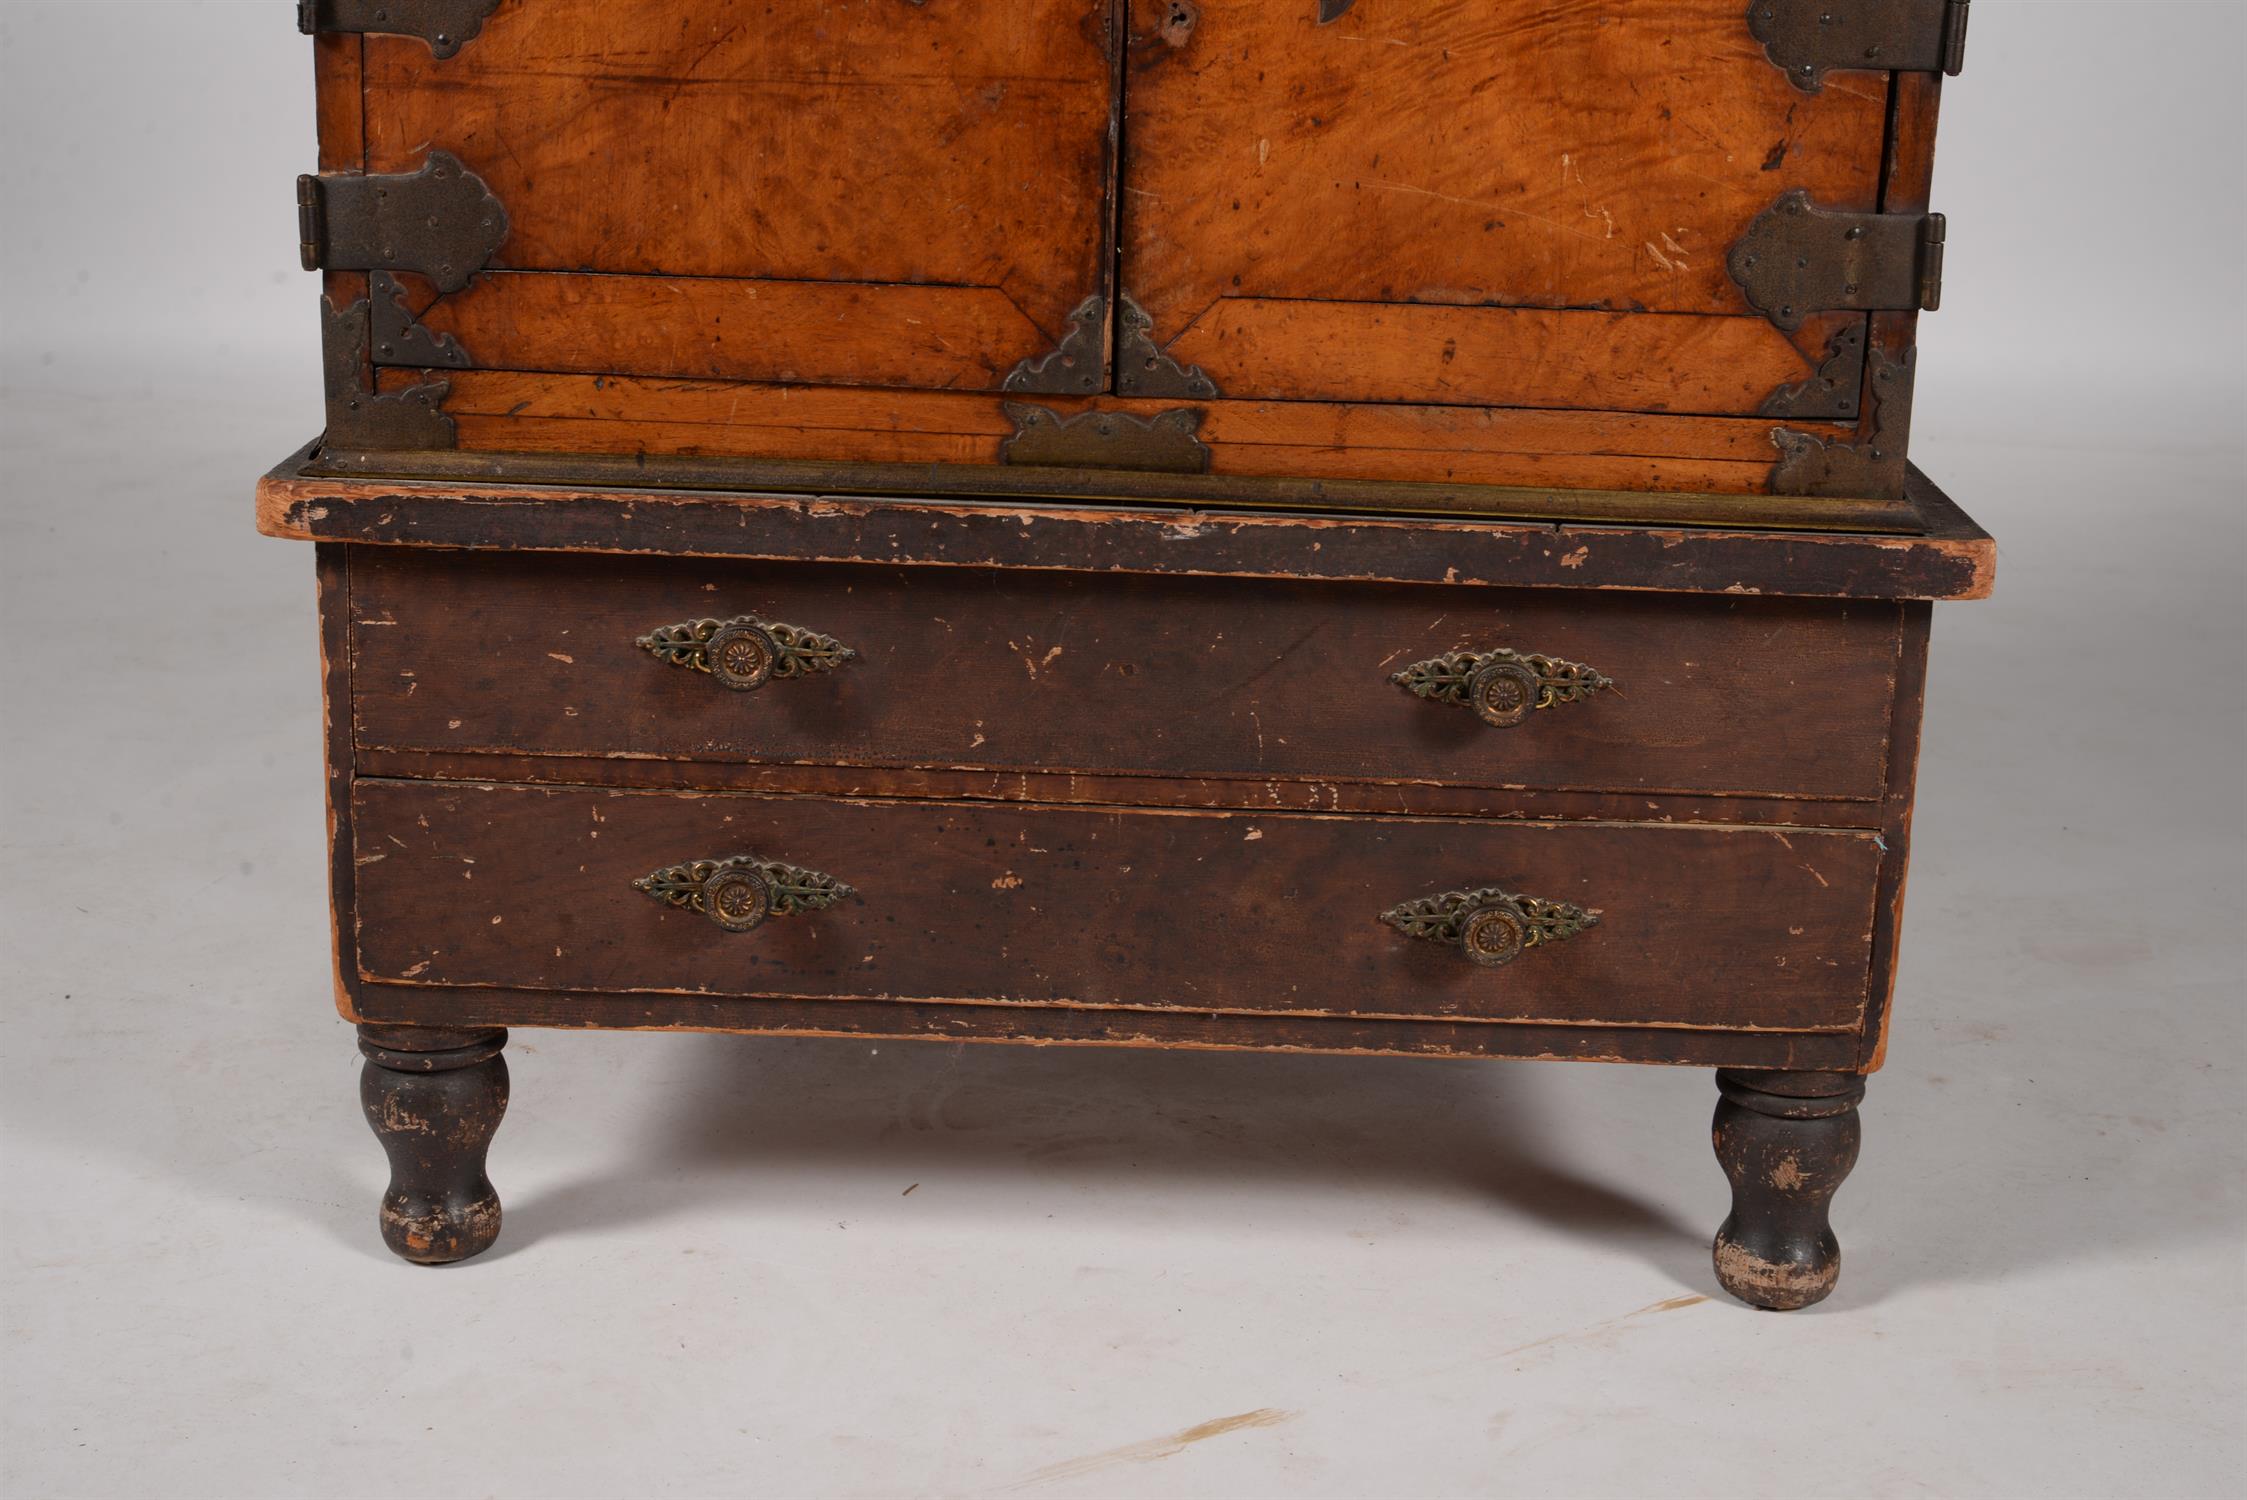 A Dutch Colonial exotic hardwood and brass mounted cabinet - Image 5 of 8